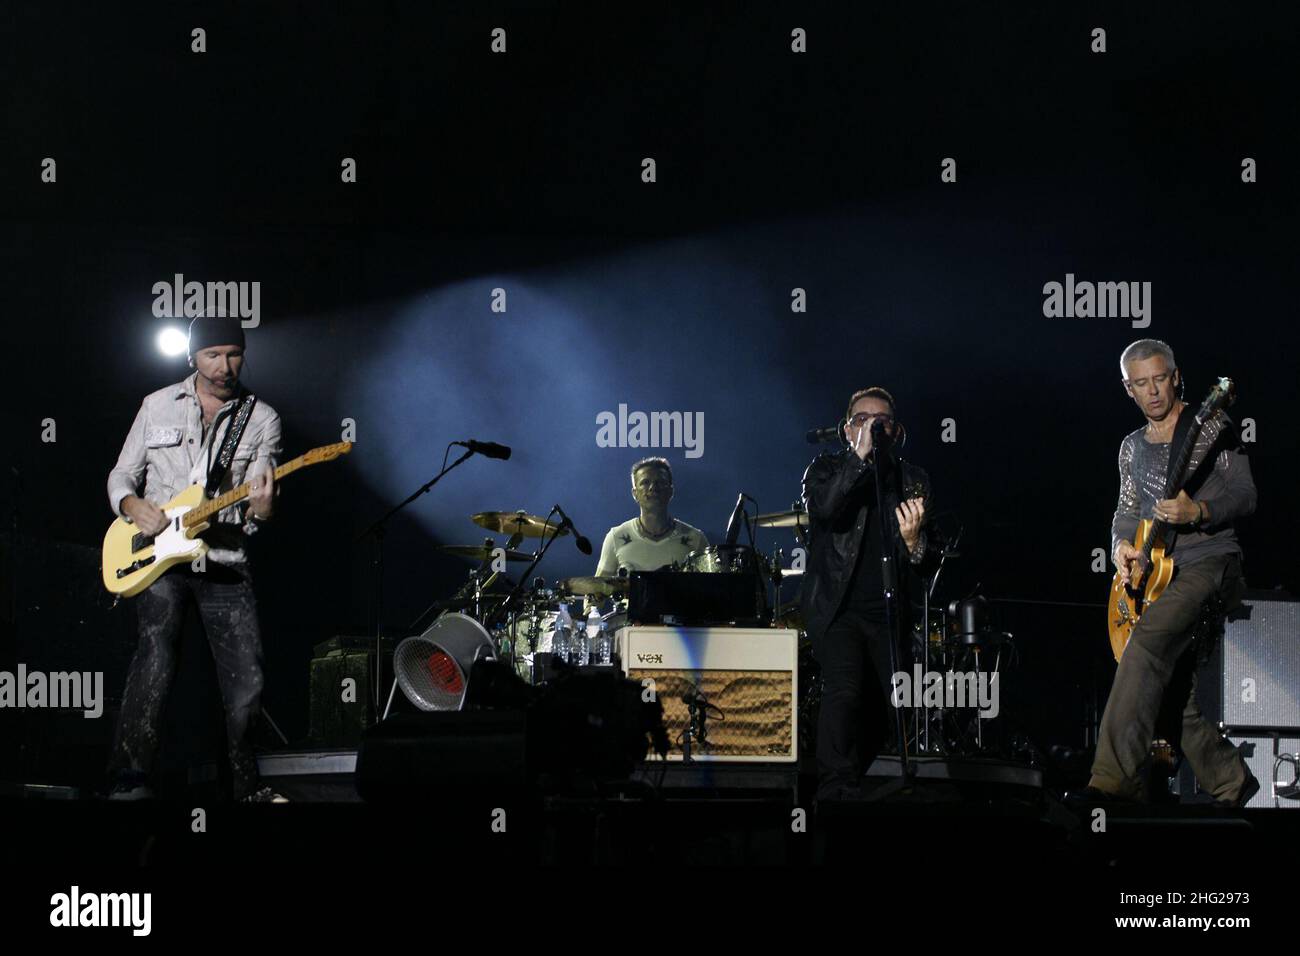 The Edge (l), Larry Mullen, Jr. (second left), Bono (second right) and  Adam Clayton (r) also know as U2 perform in concert at the ' Charles Ehrmann' stadium as part of their 360 degree Tour in Nice, France Stock Photo